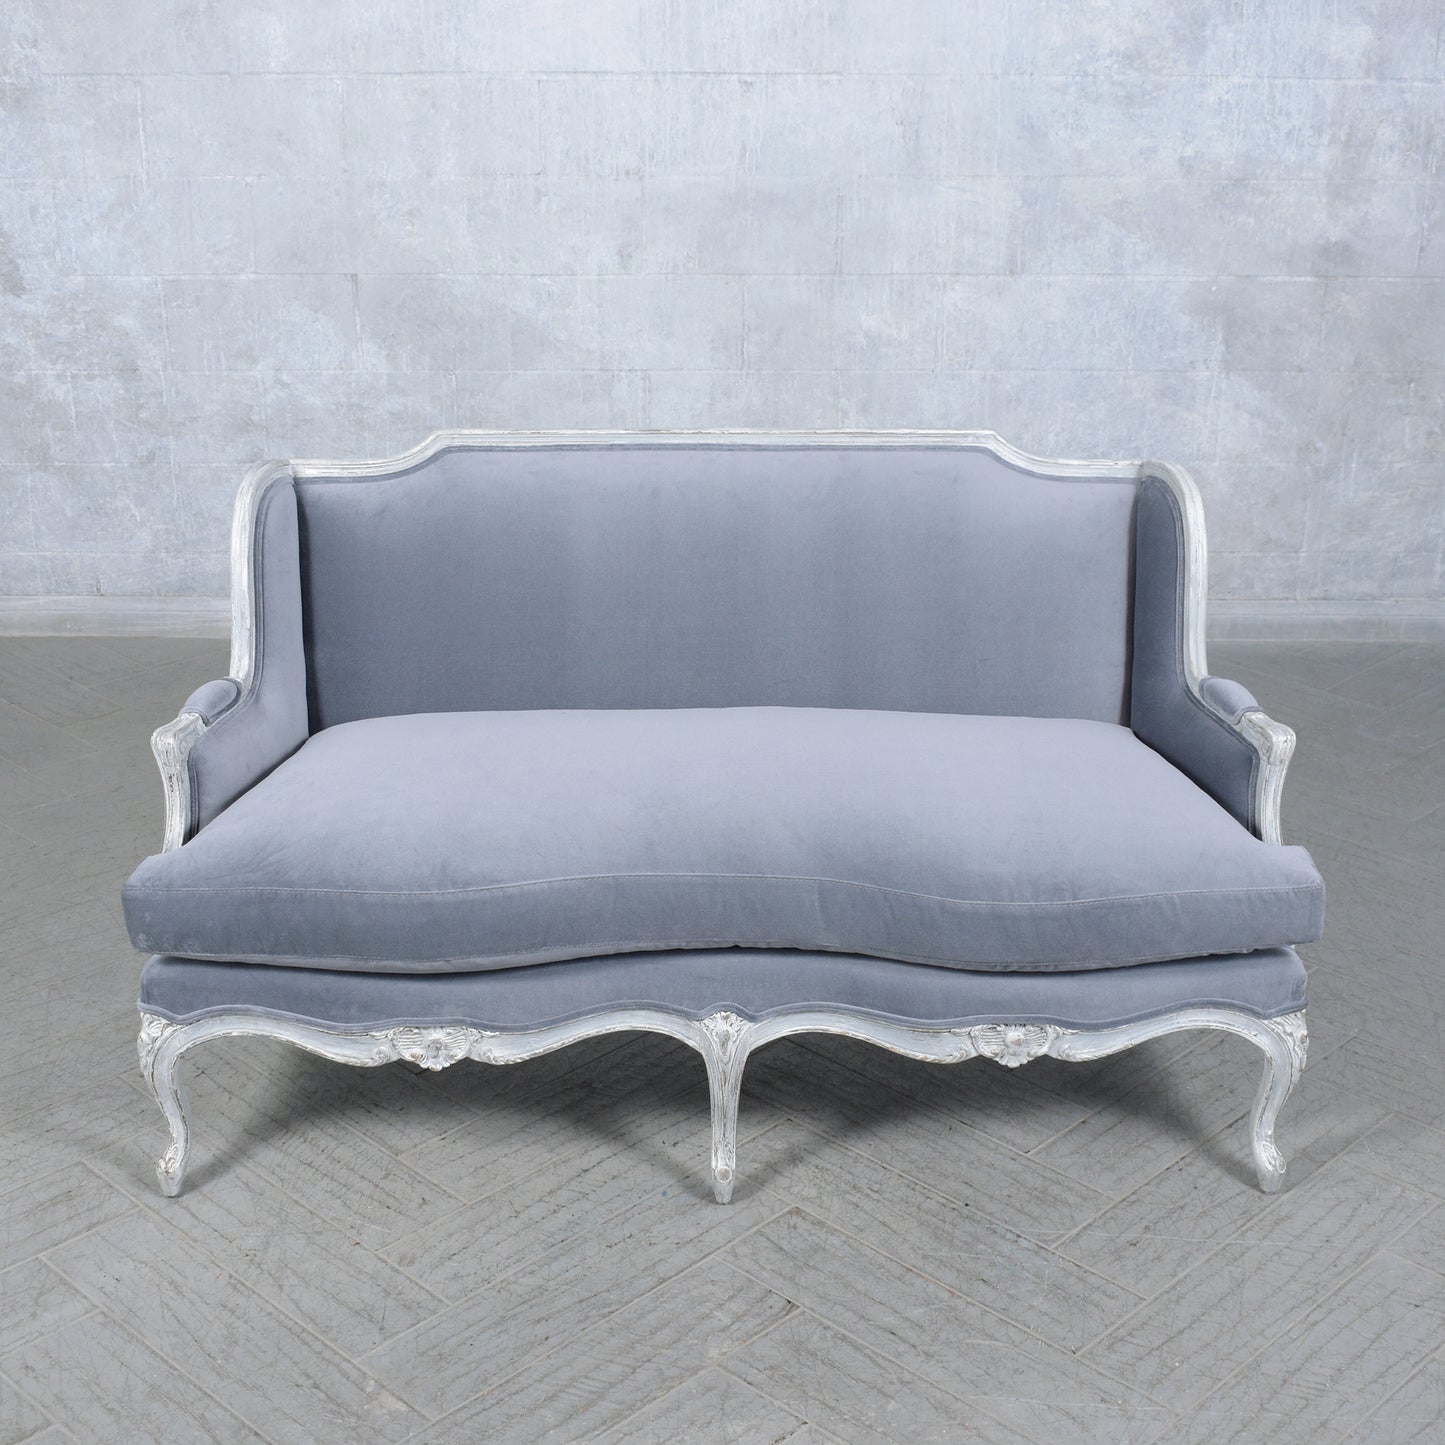 Revived French Louis XV Style Loveseat: A Fusion of Elegance & Comfort